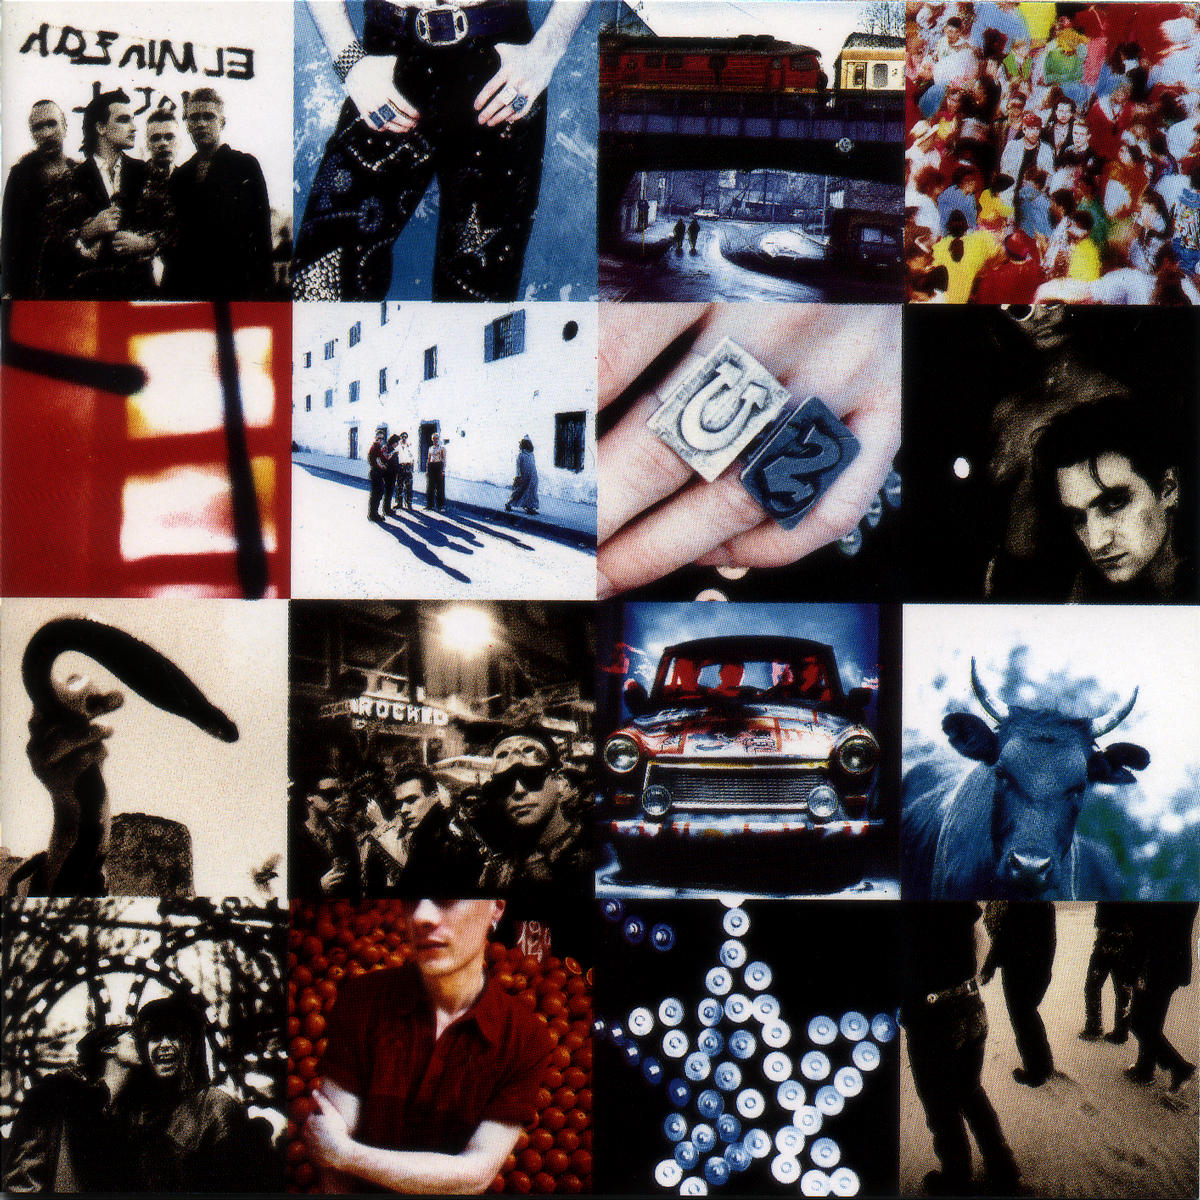 U2 (CD) - - Achtung Baby (Remastered)